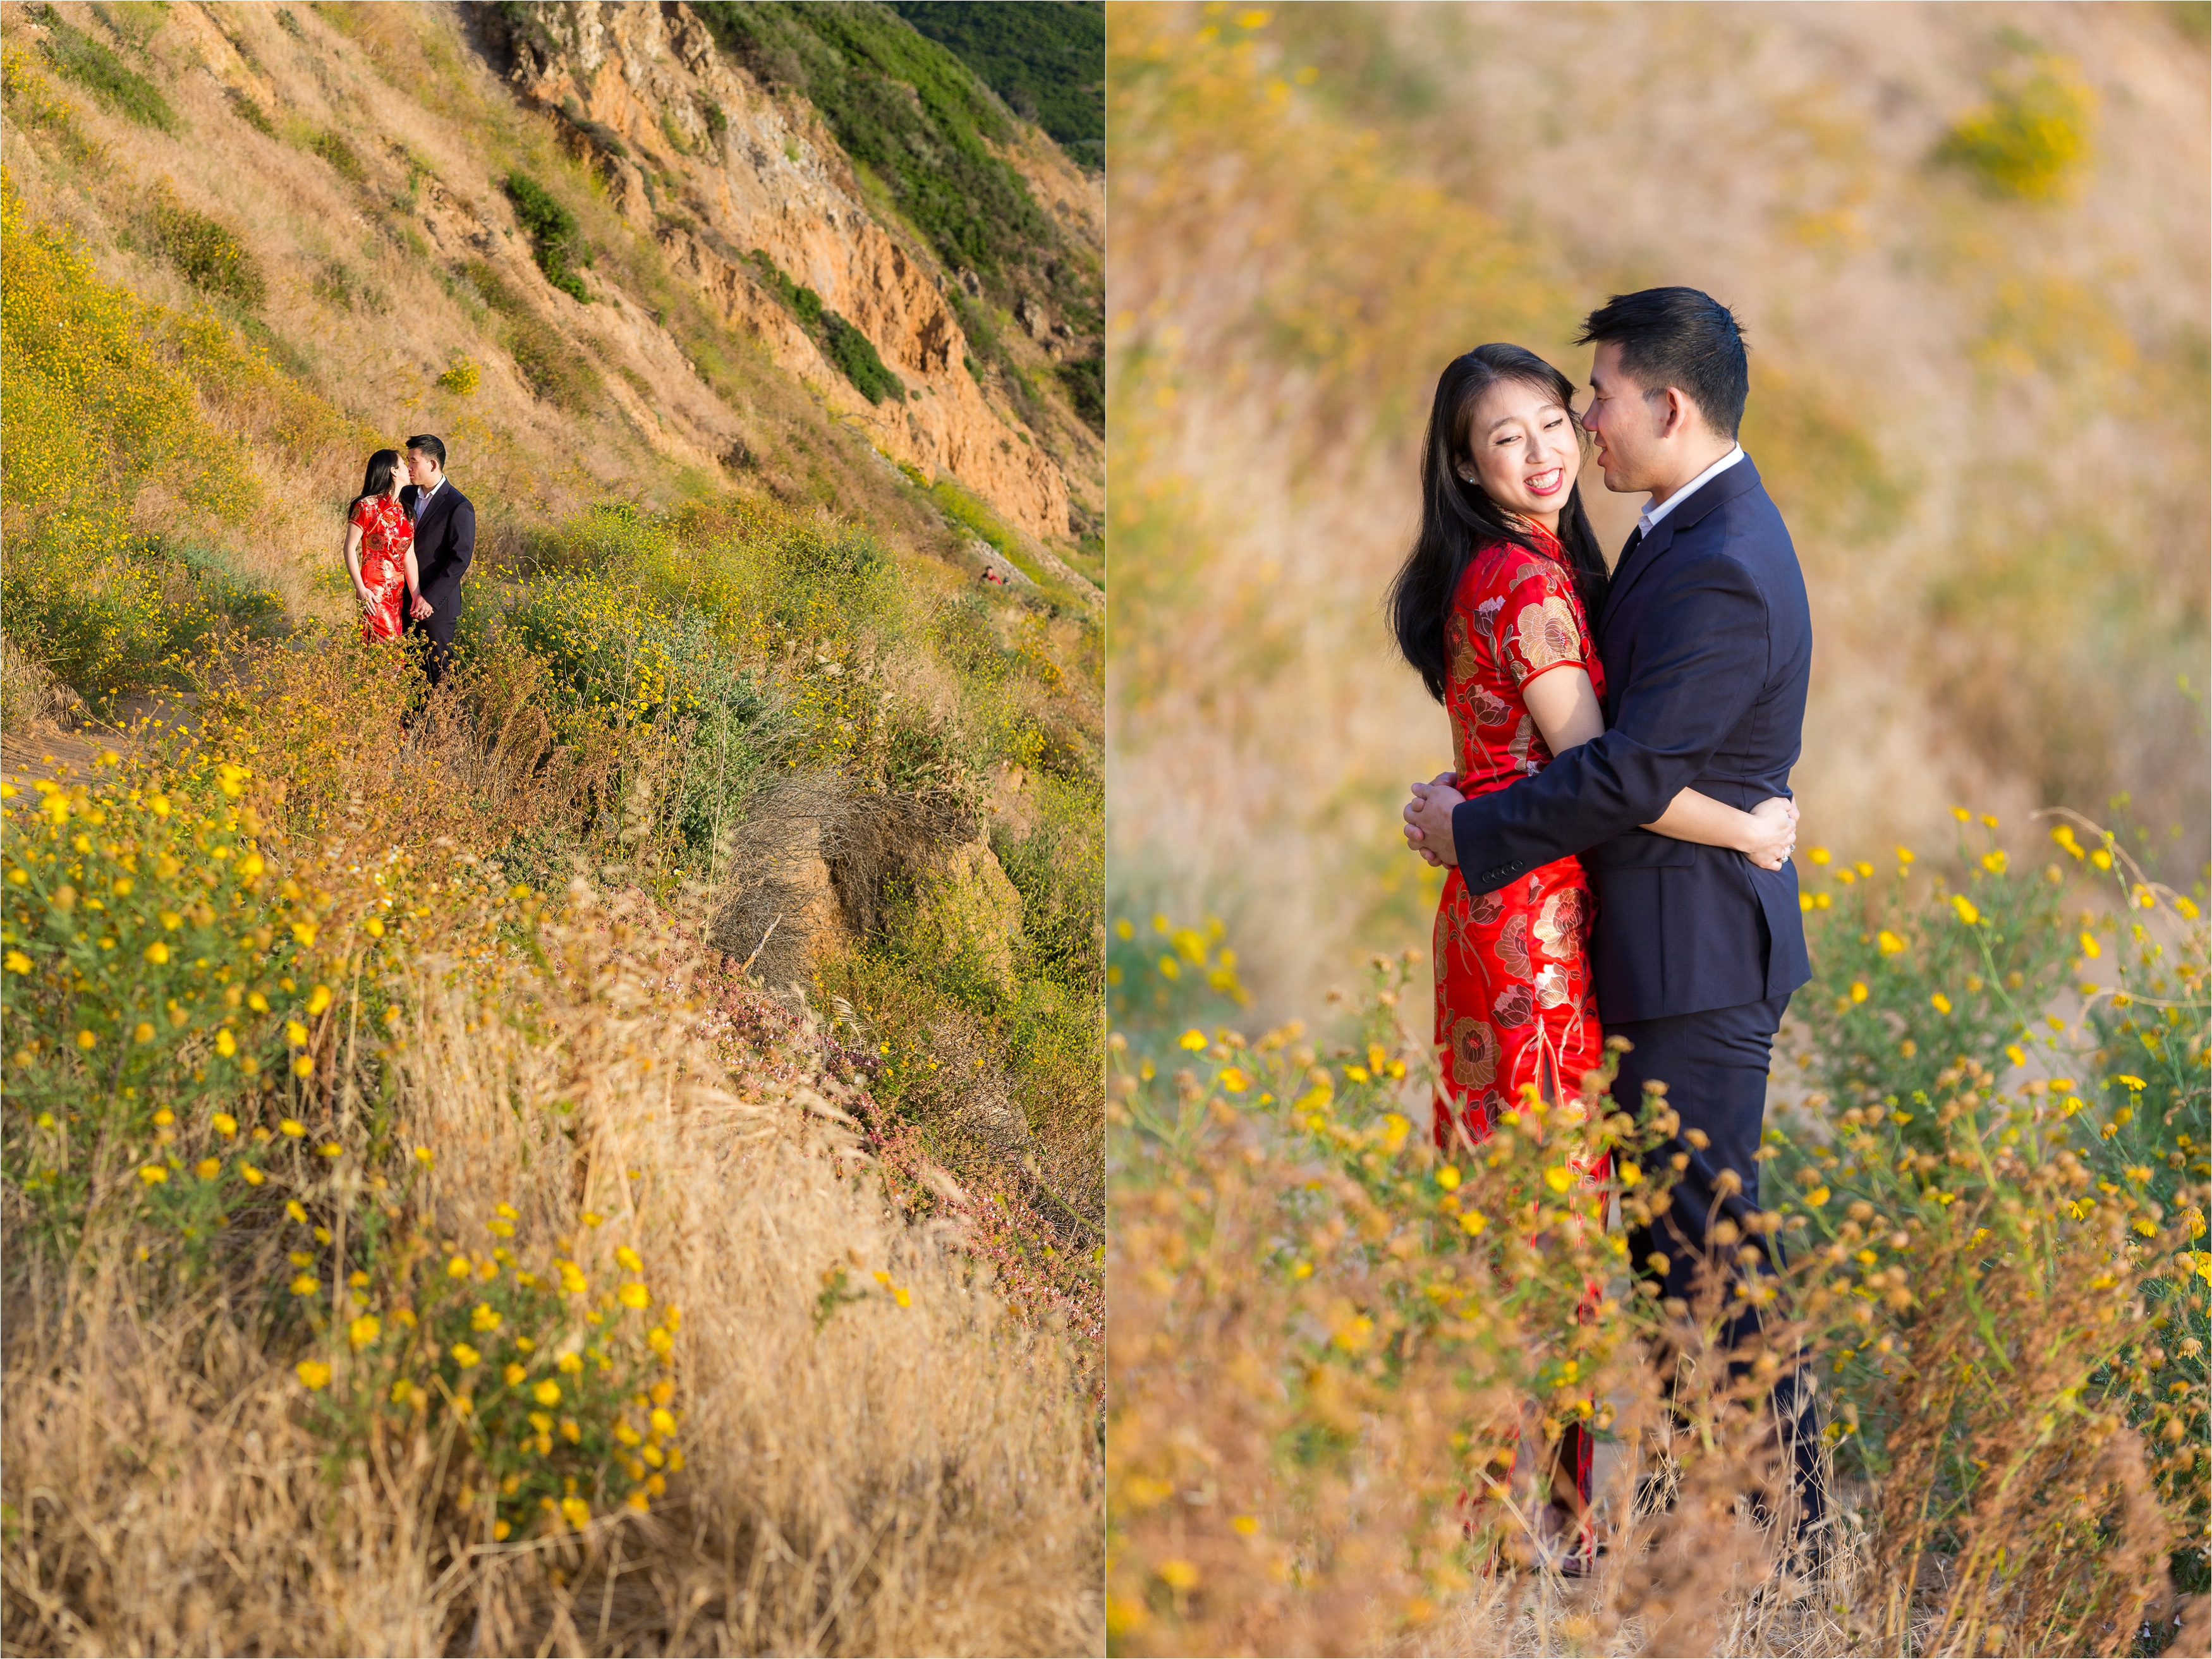 Sweethearts holding each other in yellow field along cliffside